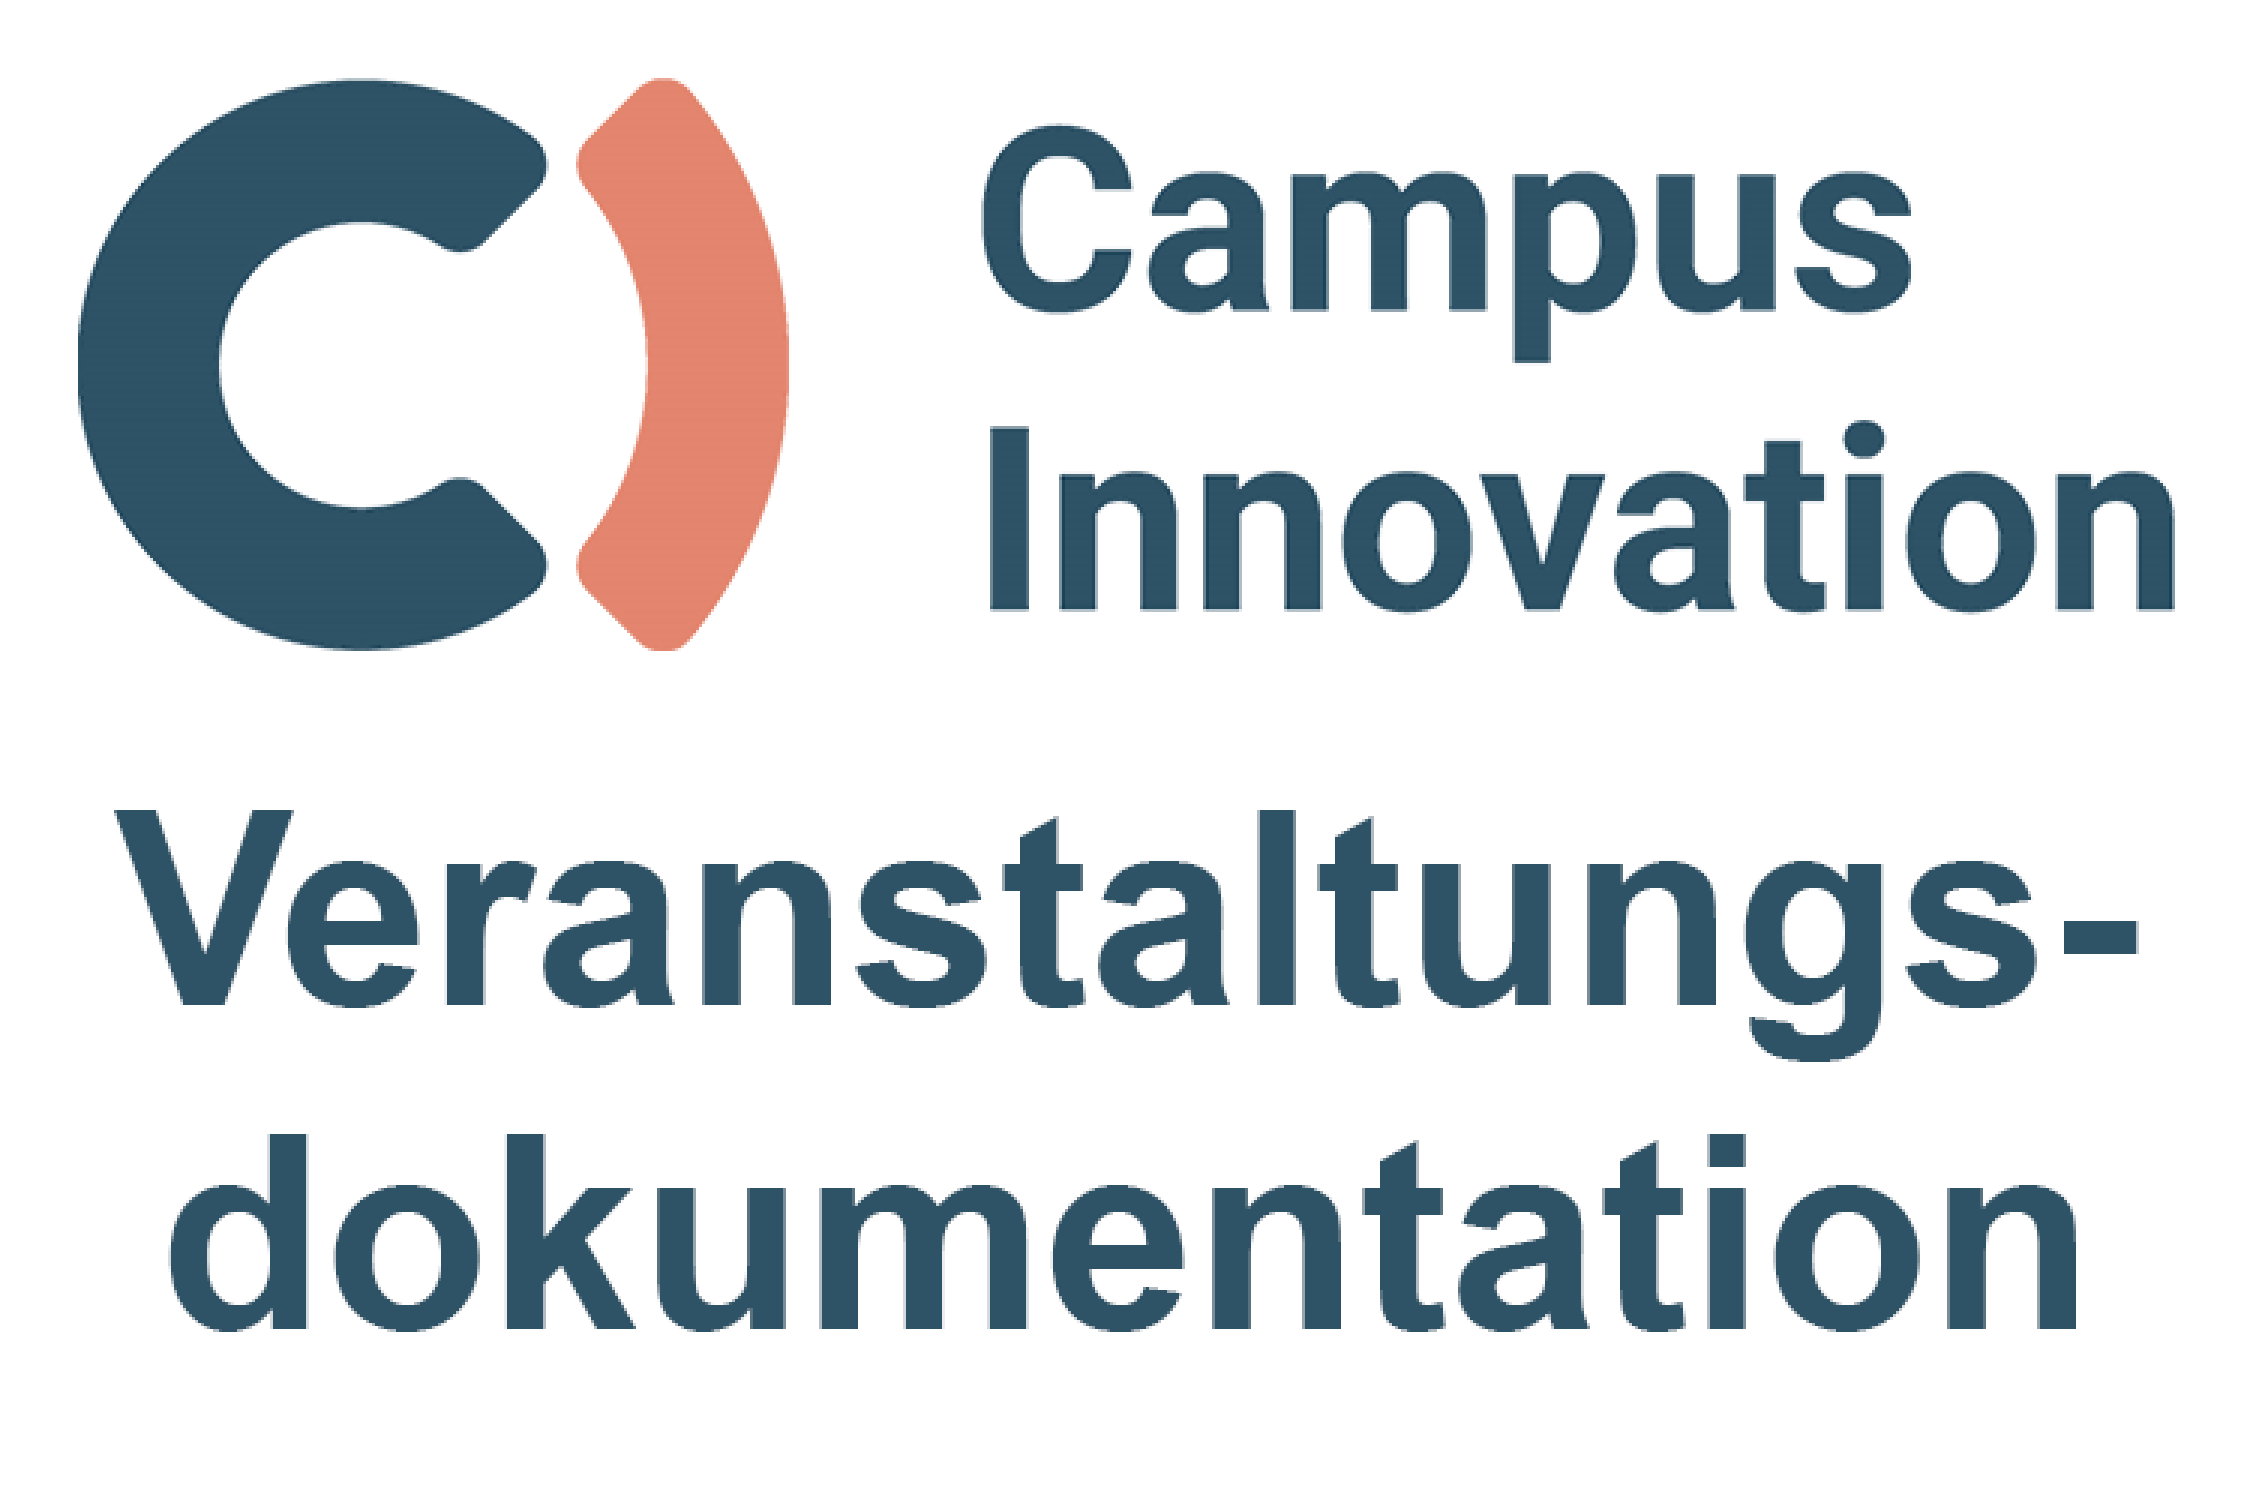 The event documentation for Campus Innovation 2023 is online